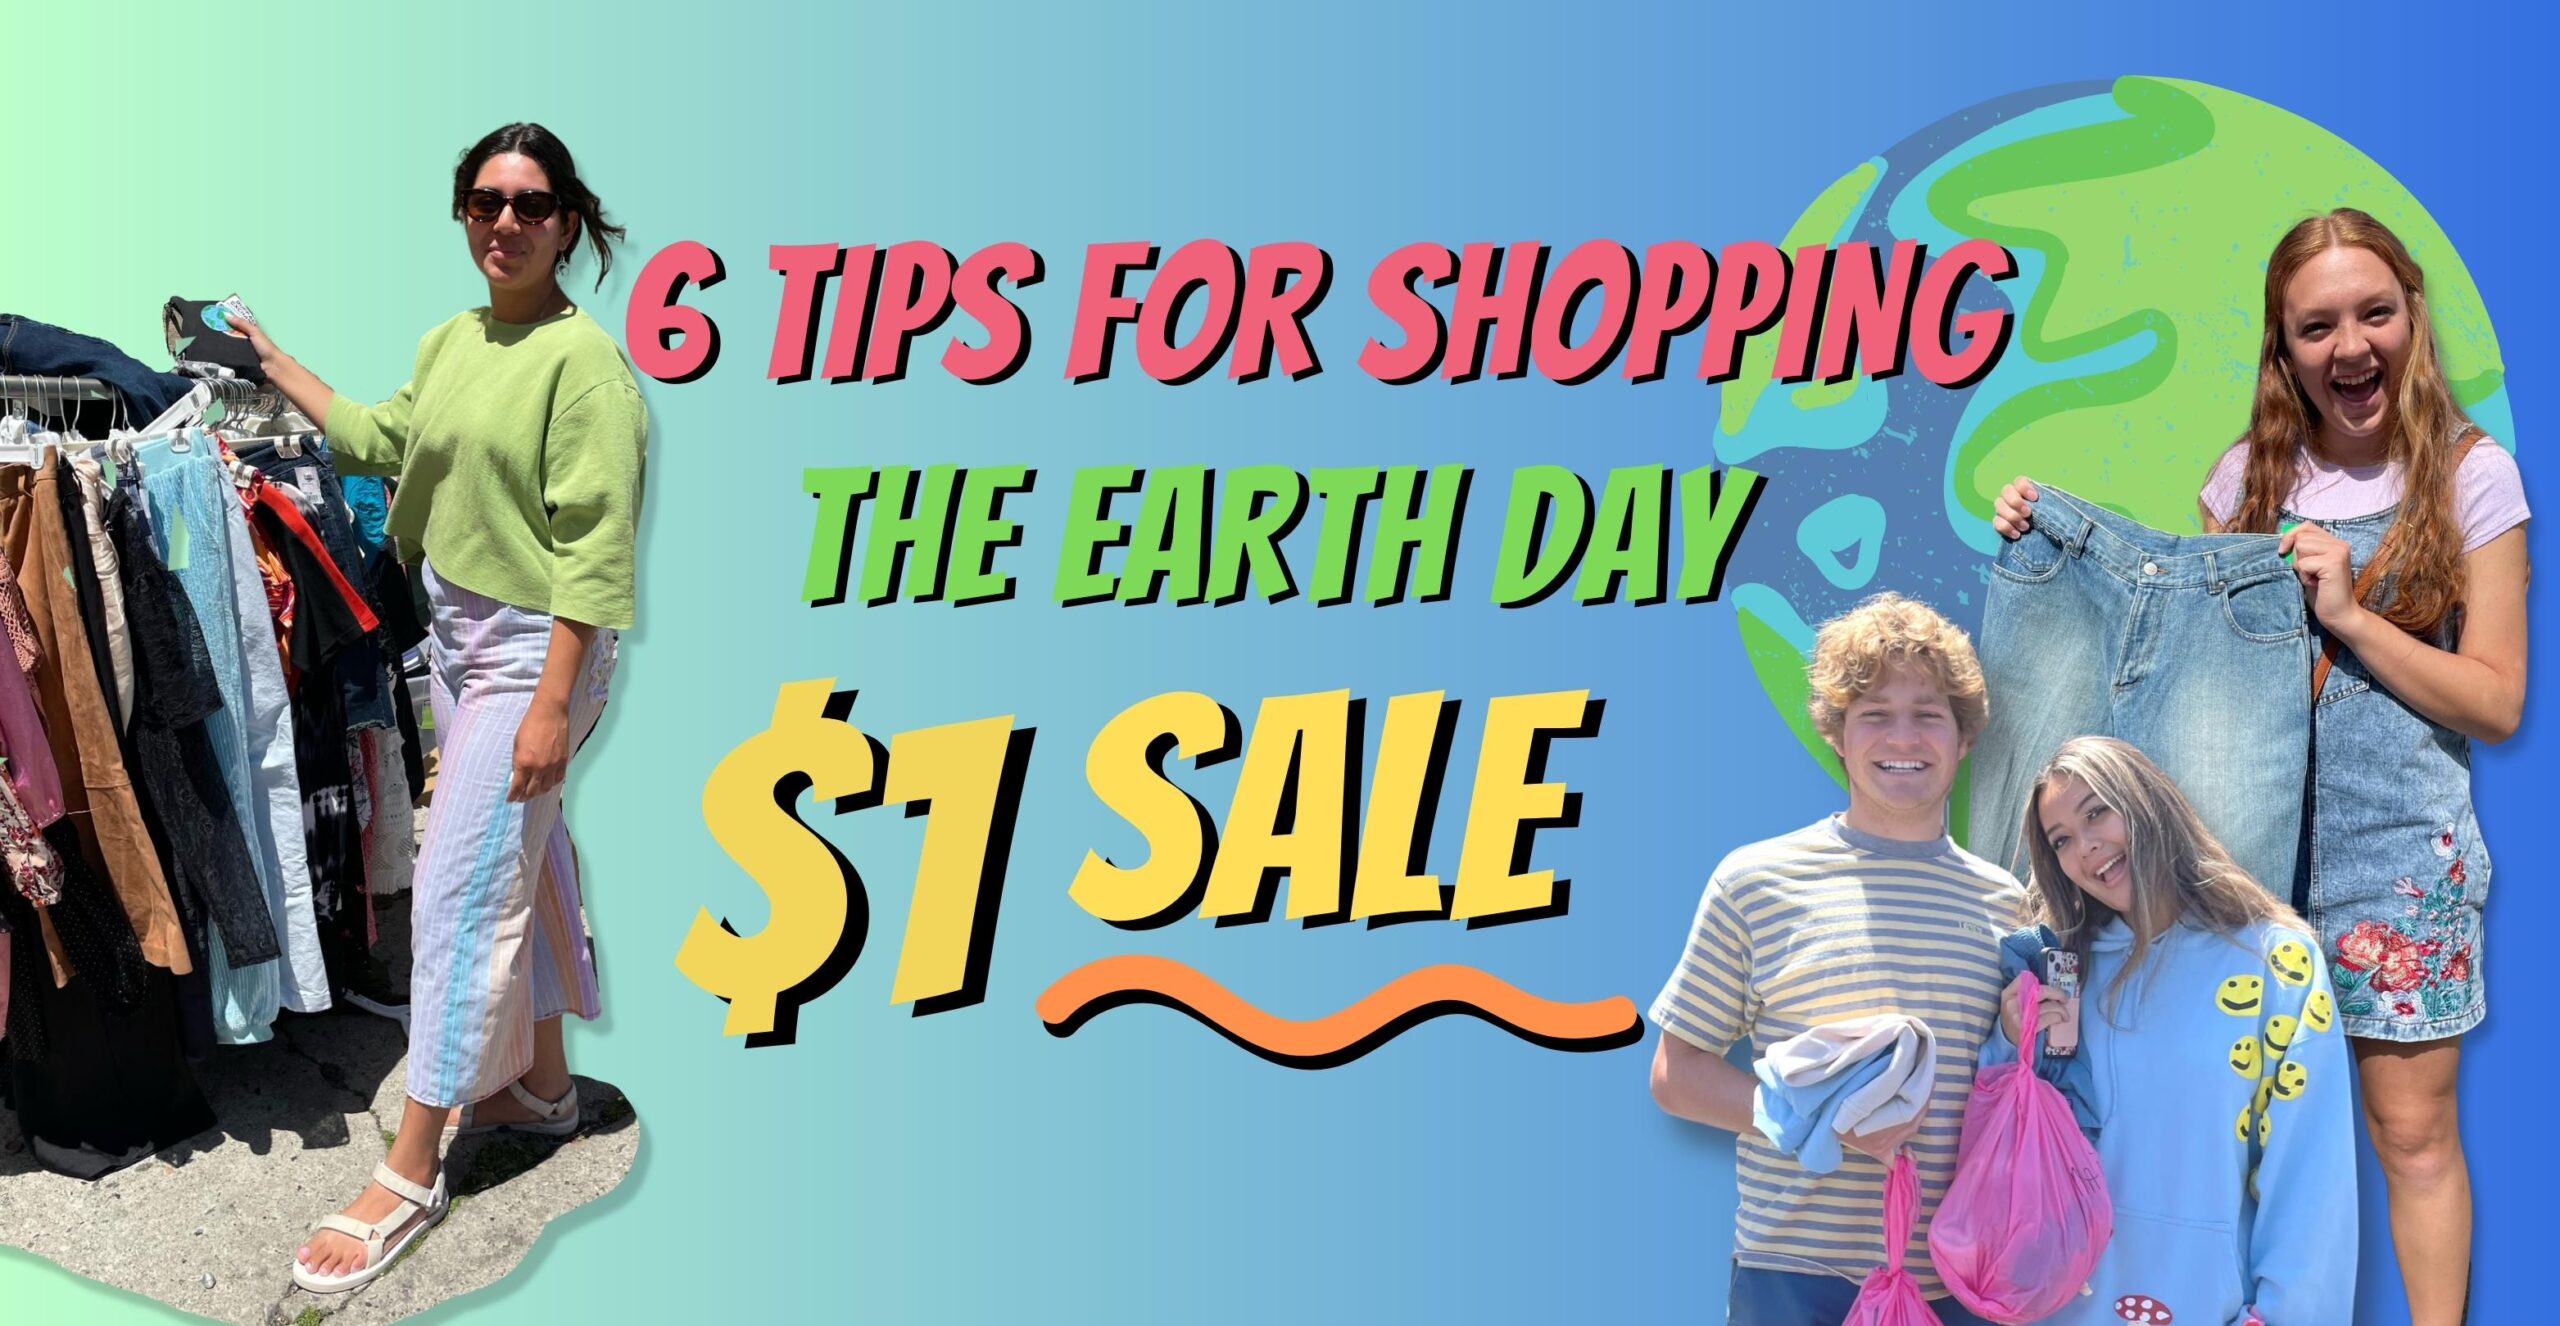 6 Tips for shopping the earth day $1 sale